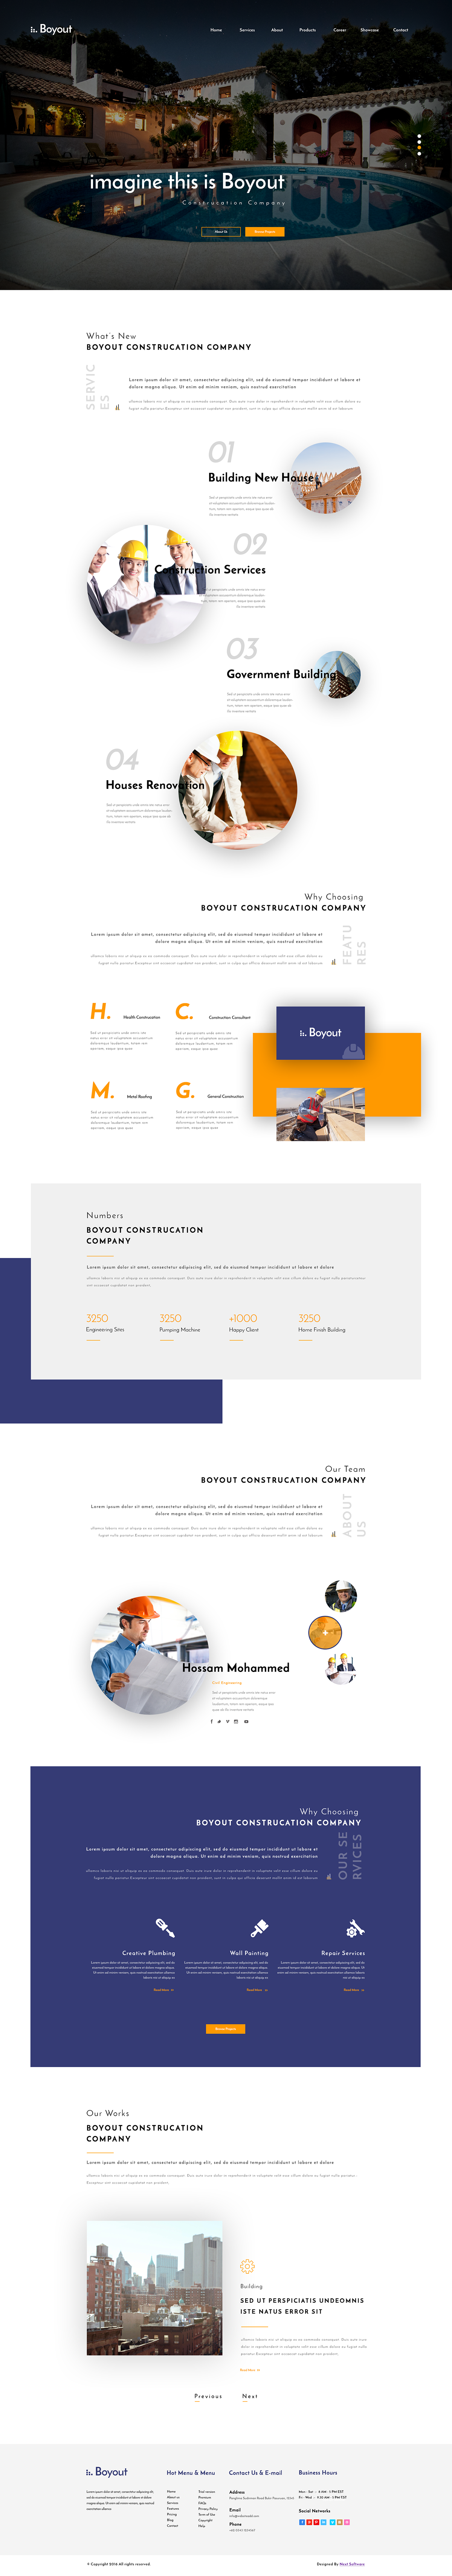 construcation UI&UX   psd Boyout Webdesign creative awesome realestate